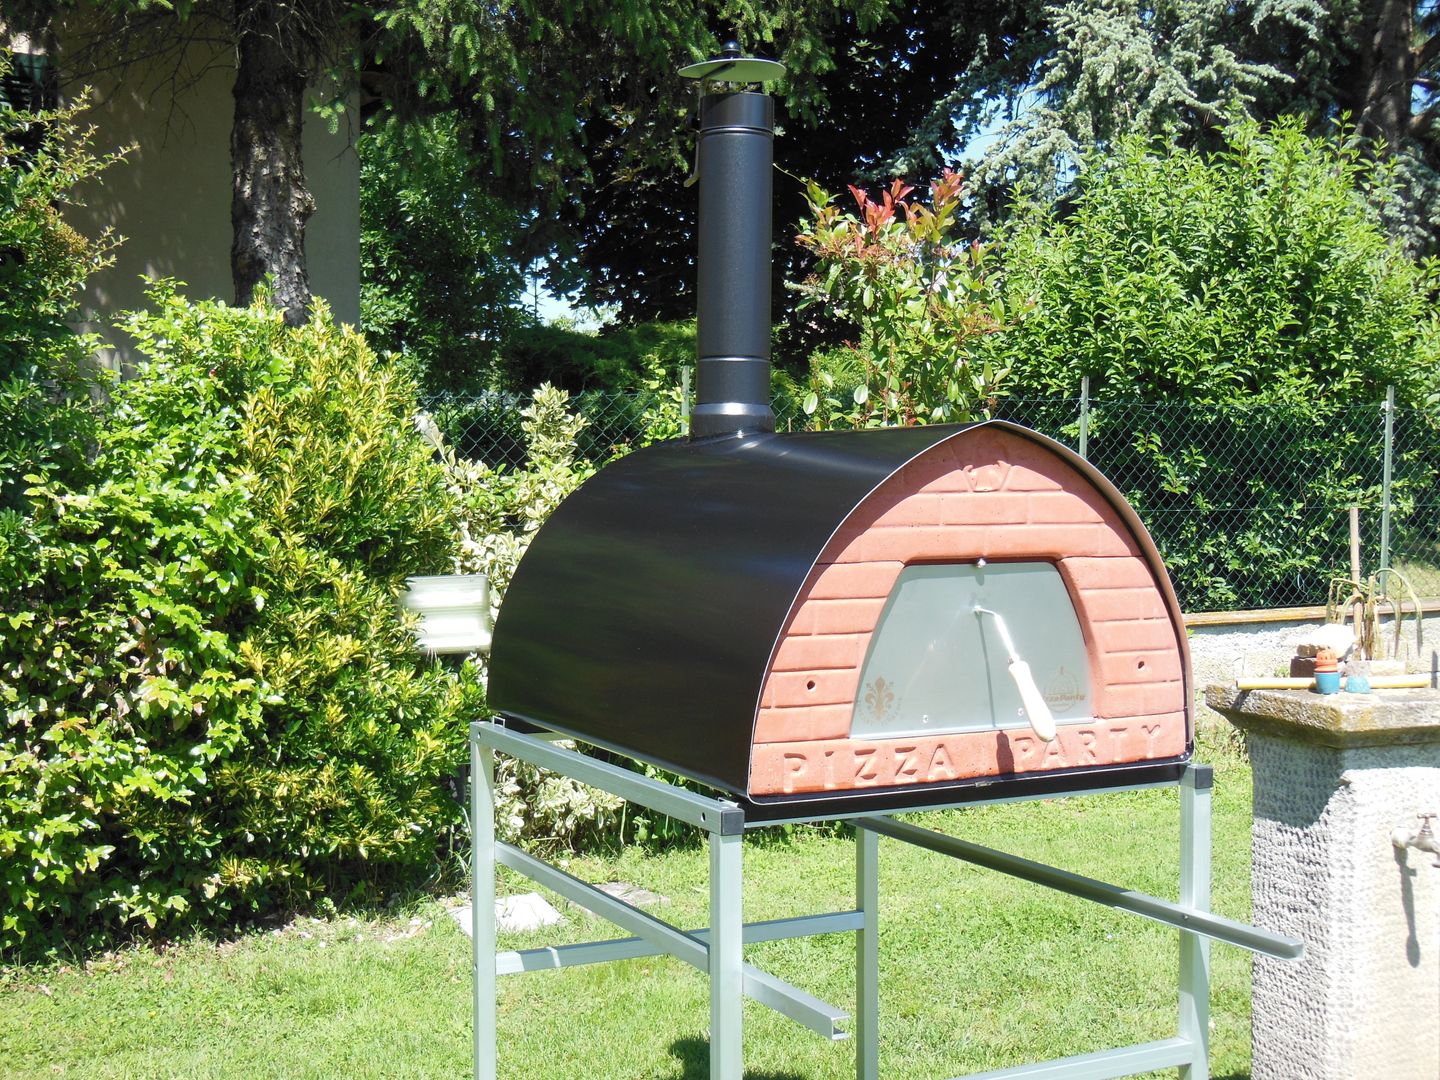 Wood fired pizza oven Pizzone by Pizza Party Genotema SRL Unipersonale 庭院 火坑與燒烤